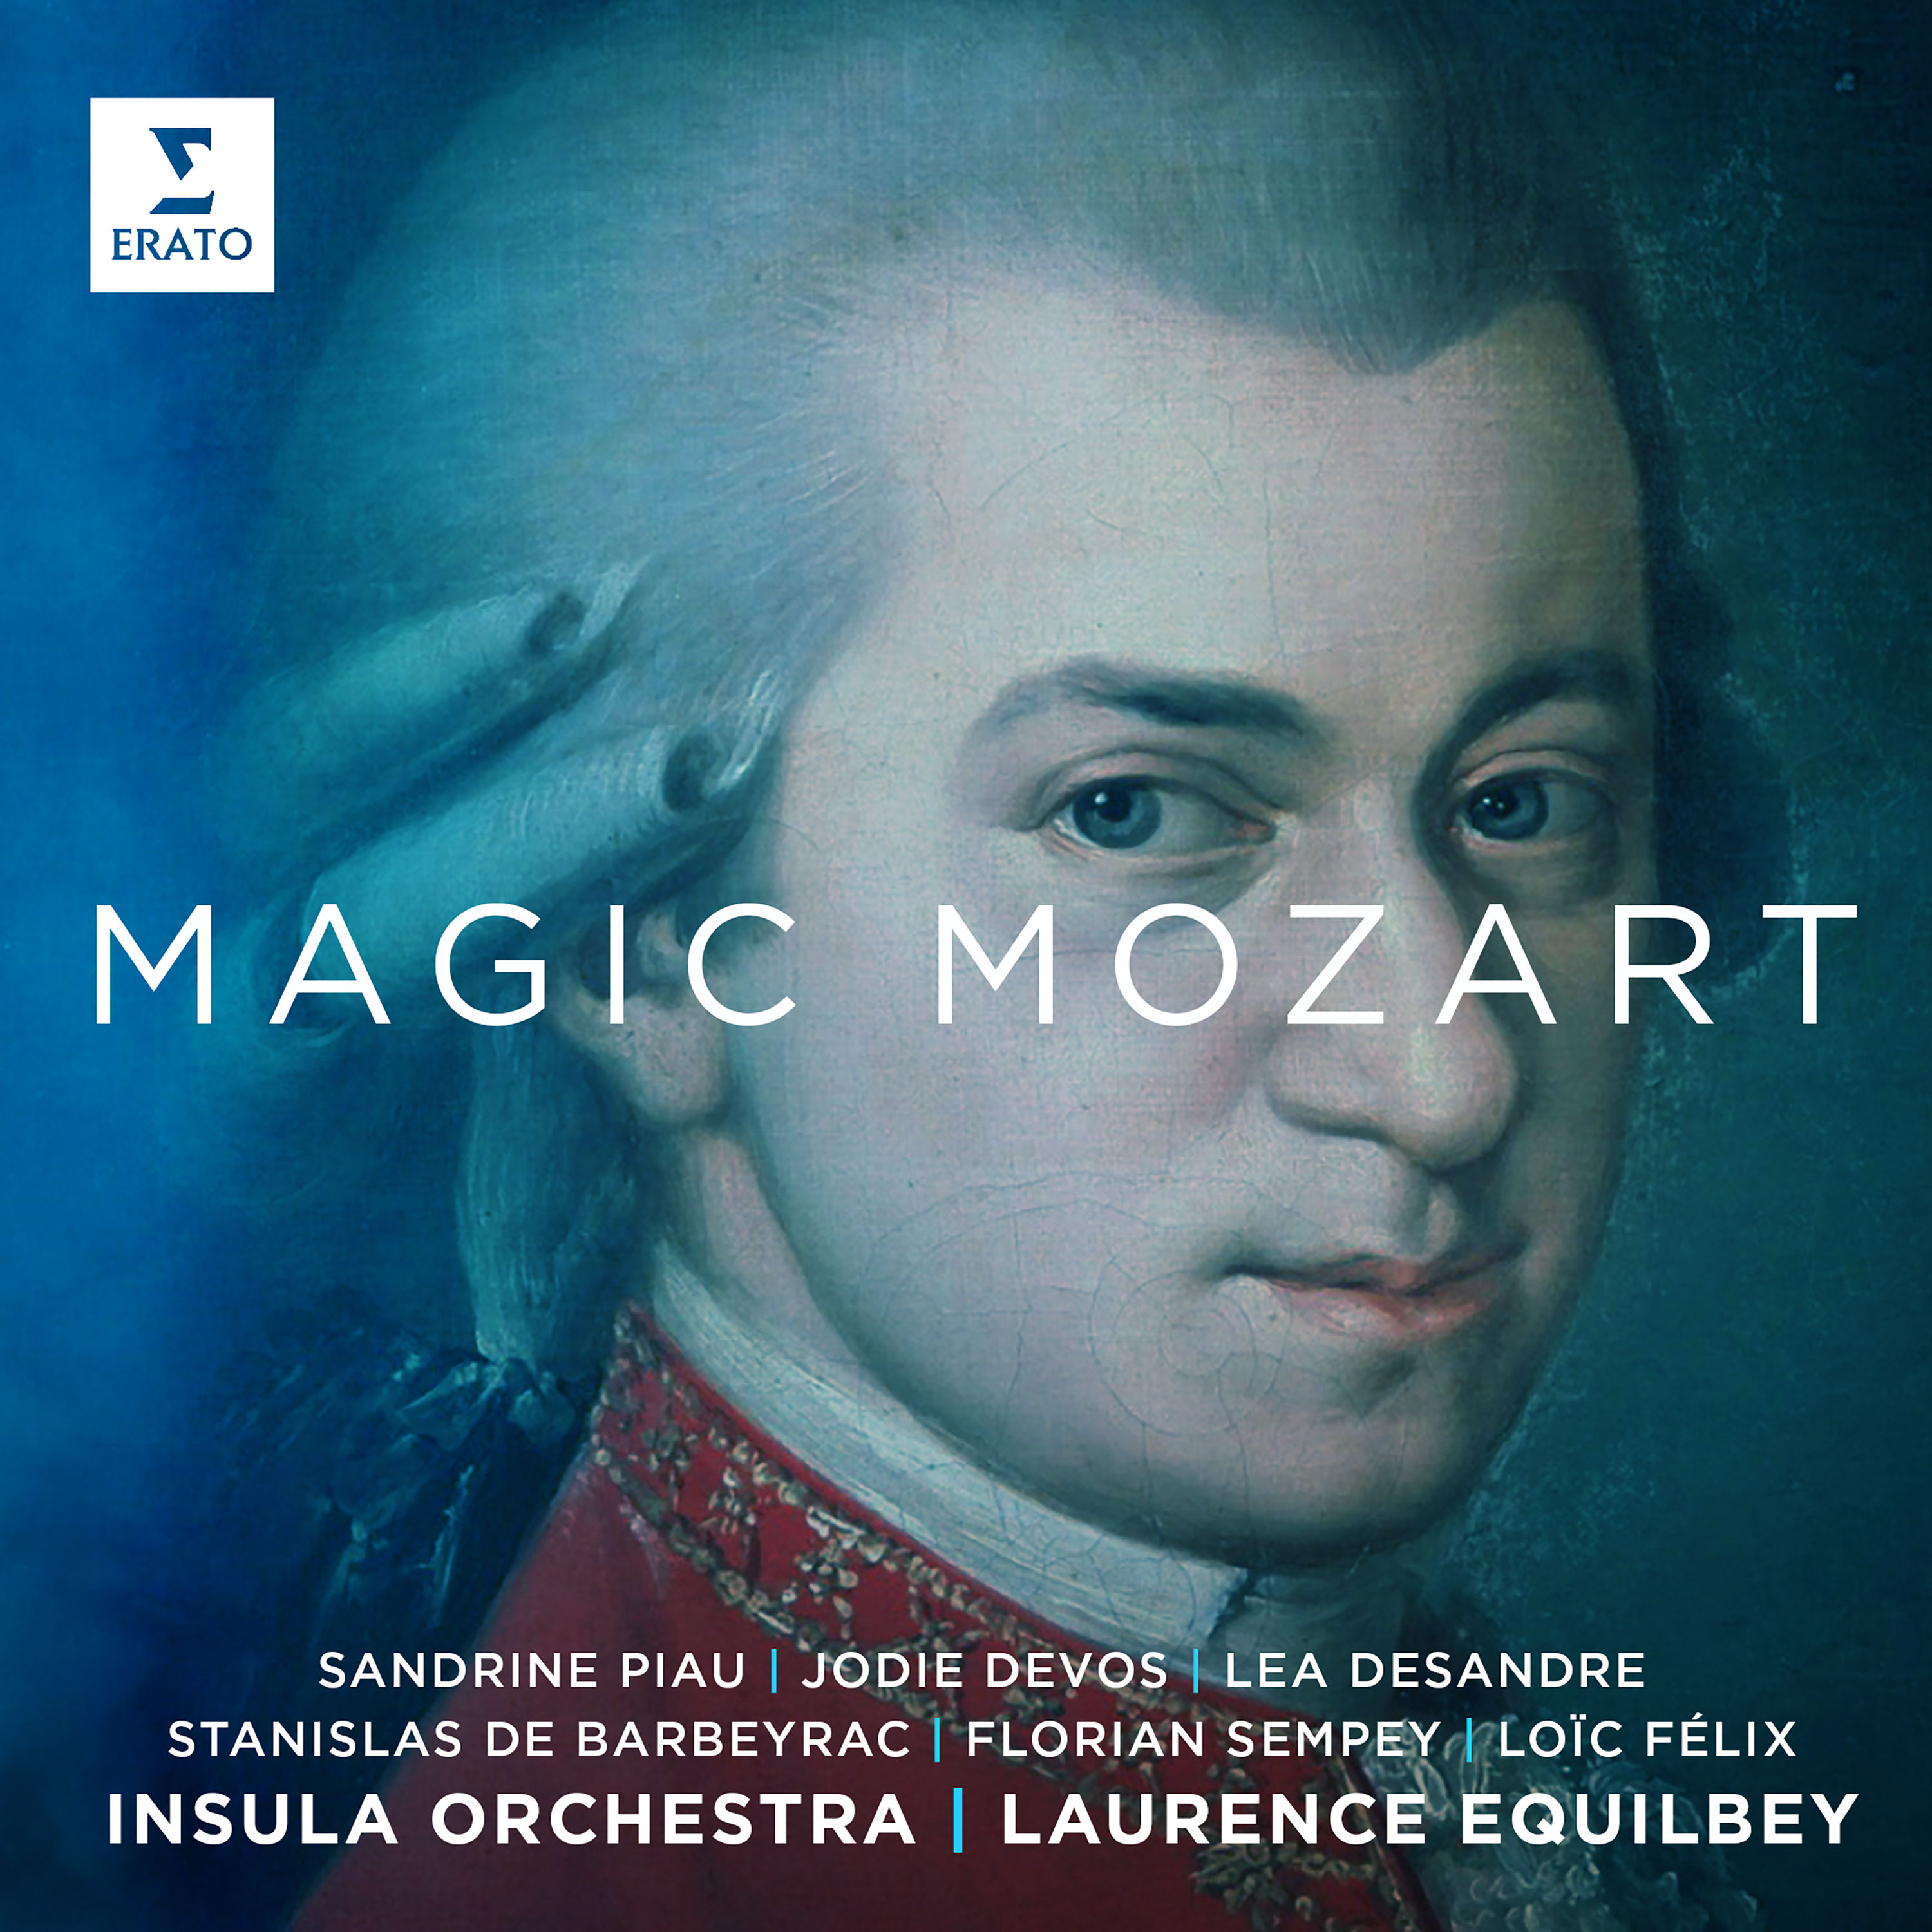 Laurence Equilbey & Insula Orchestra – Magic Mozart (2020) [FLAC 24bit/96kHz]